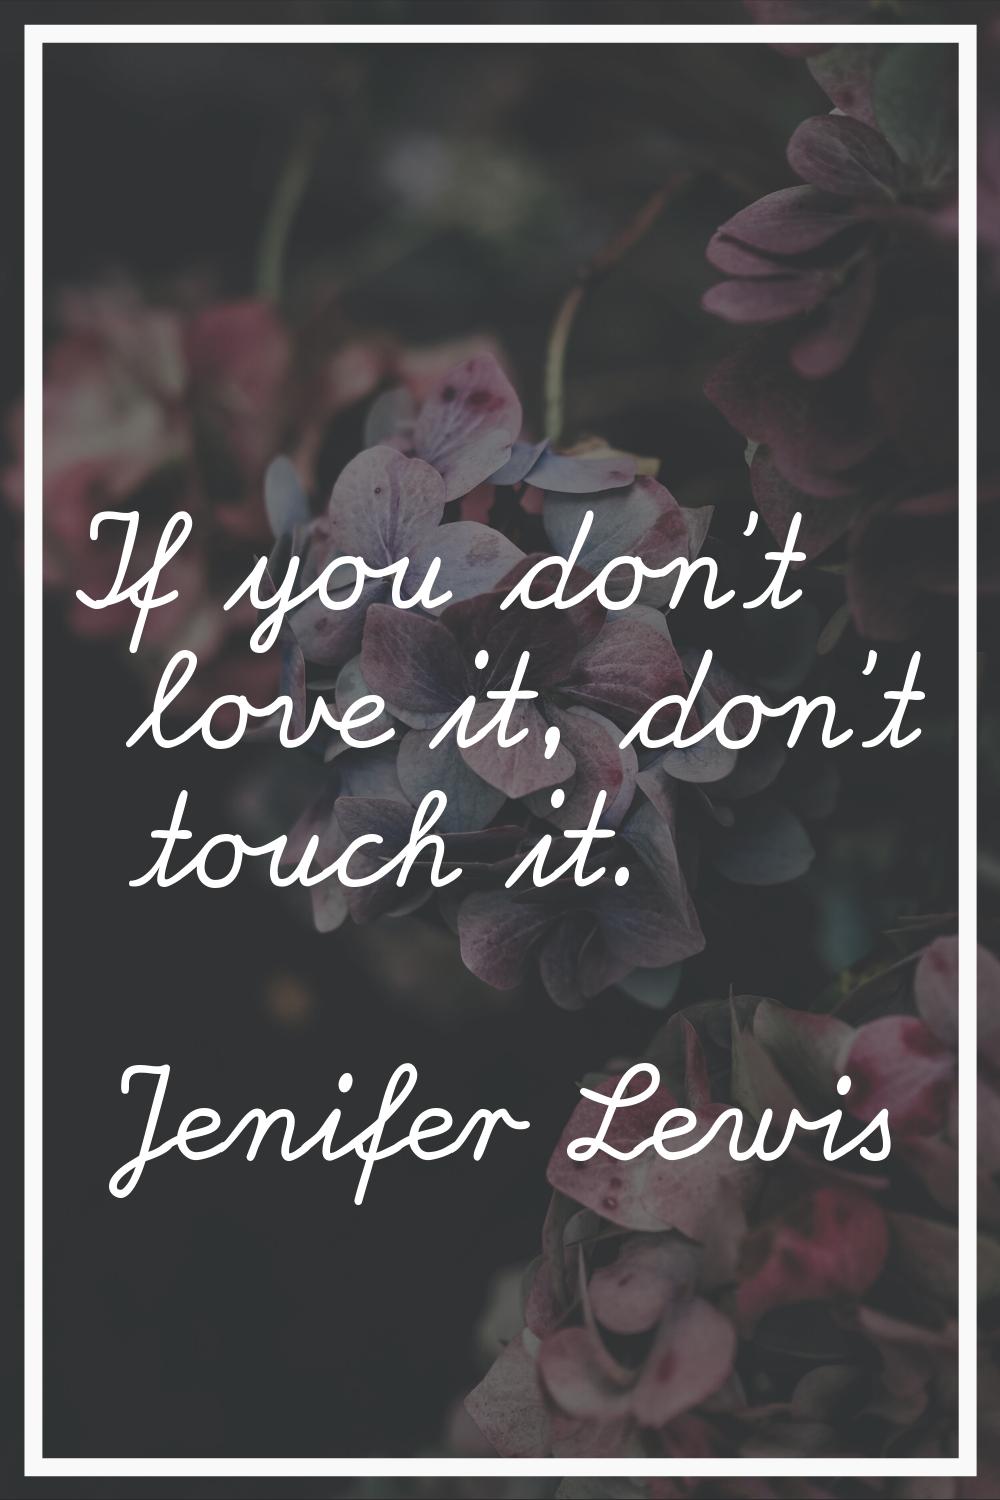 If you don't love it, don't touch it.